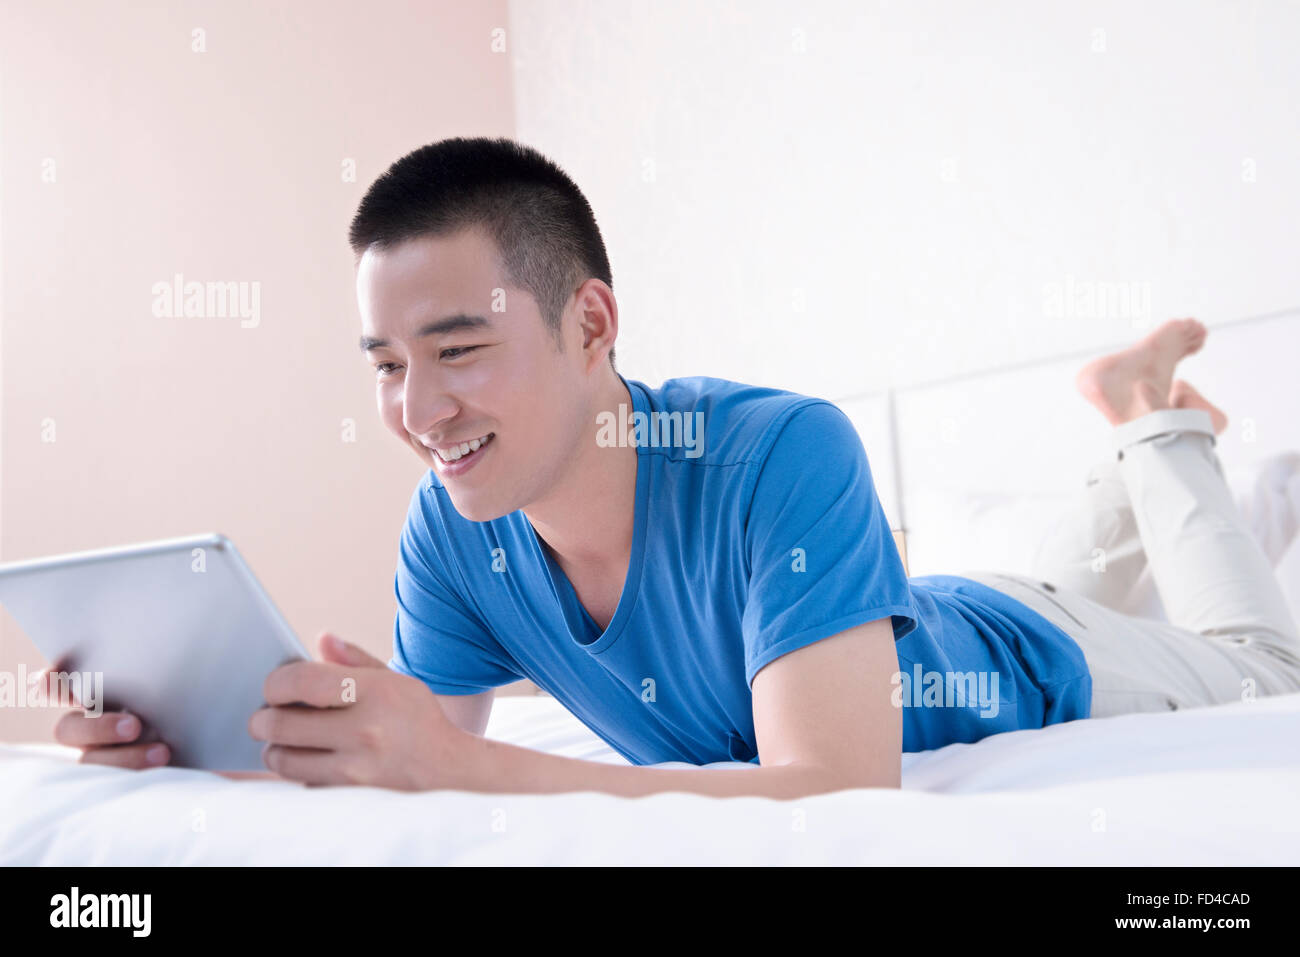 Young man using digital tablet in bed Banque D'Images